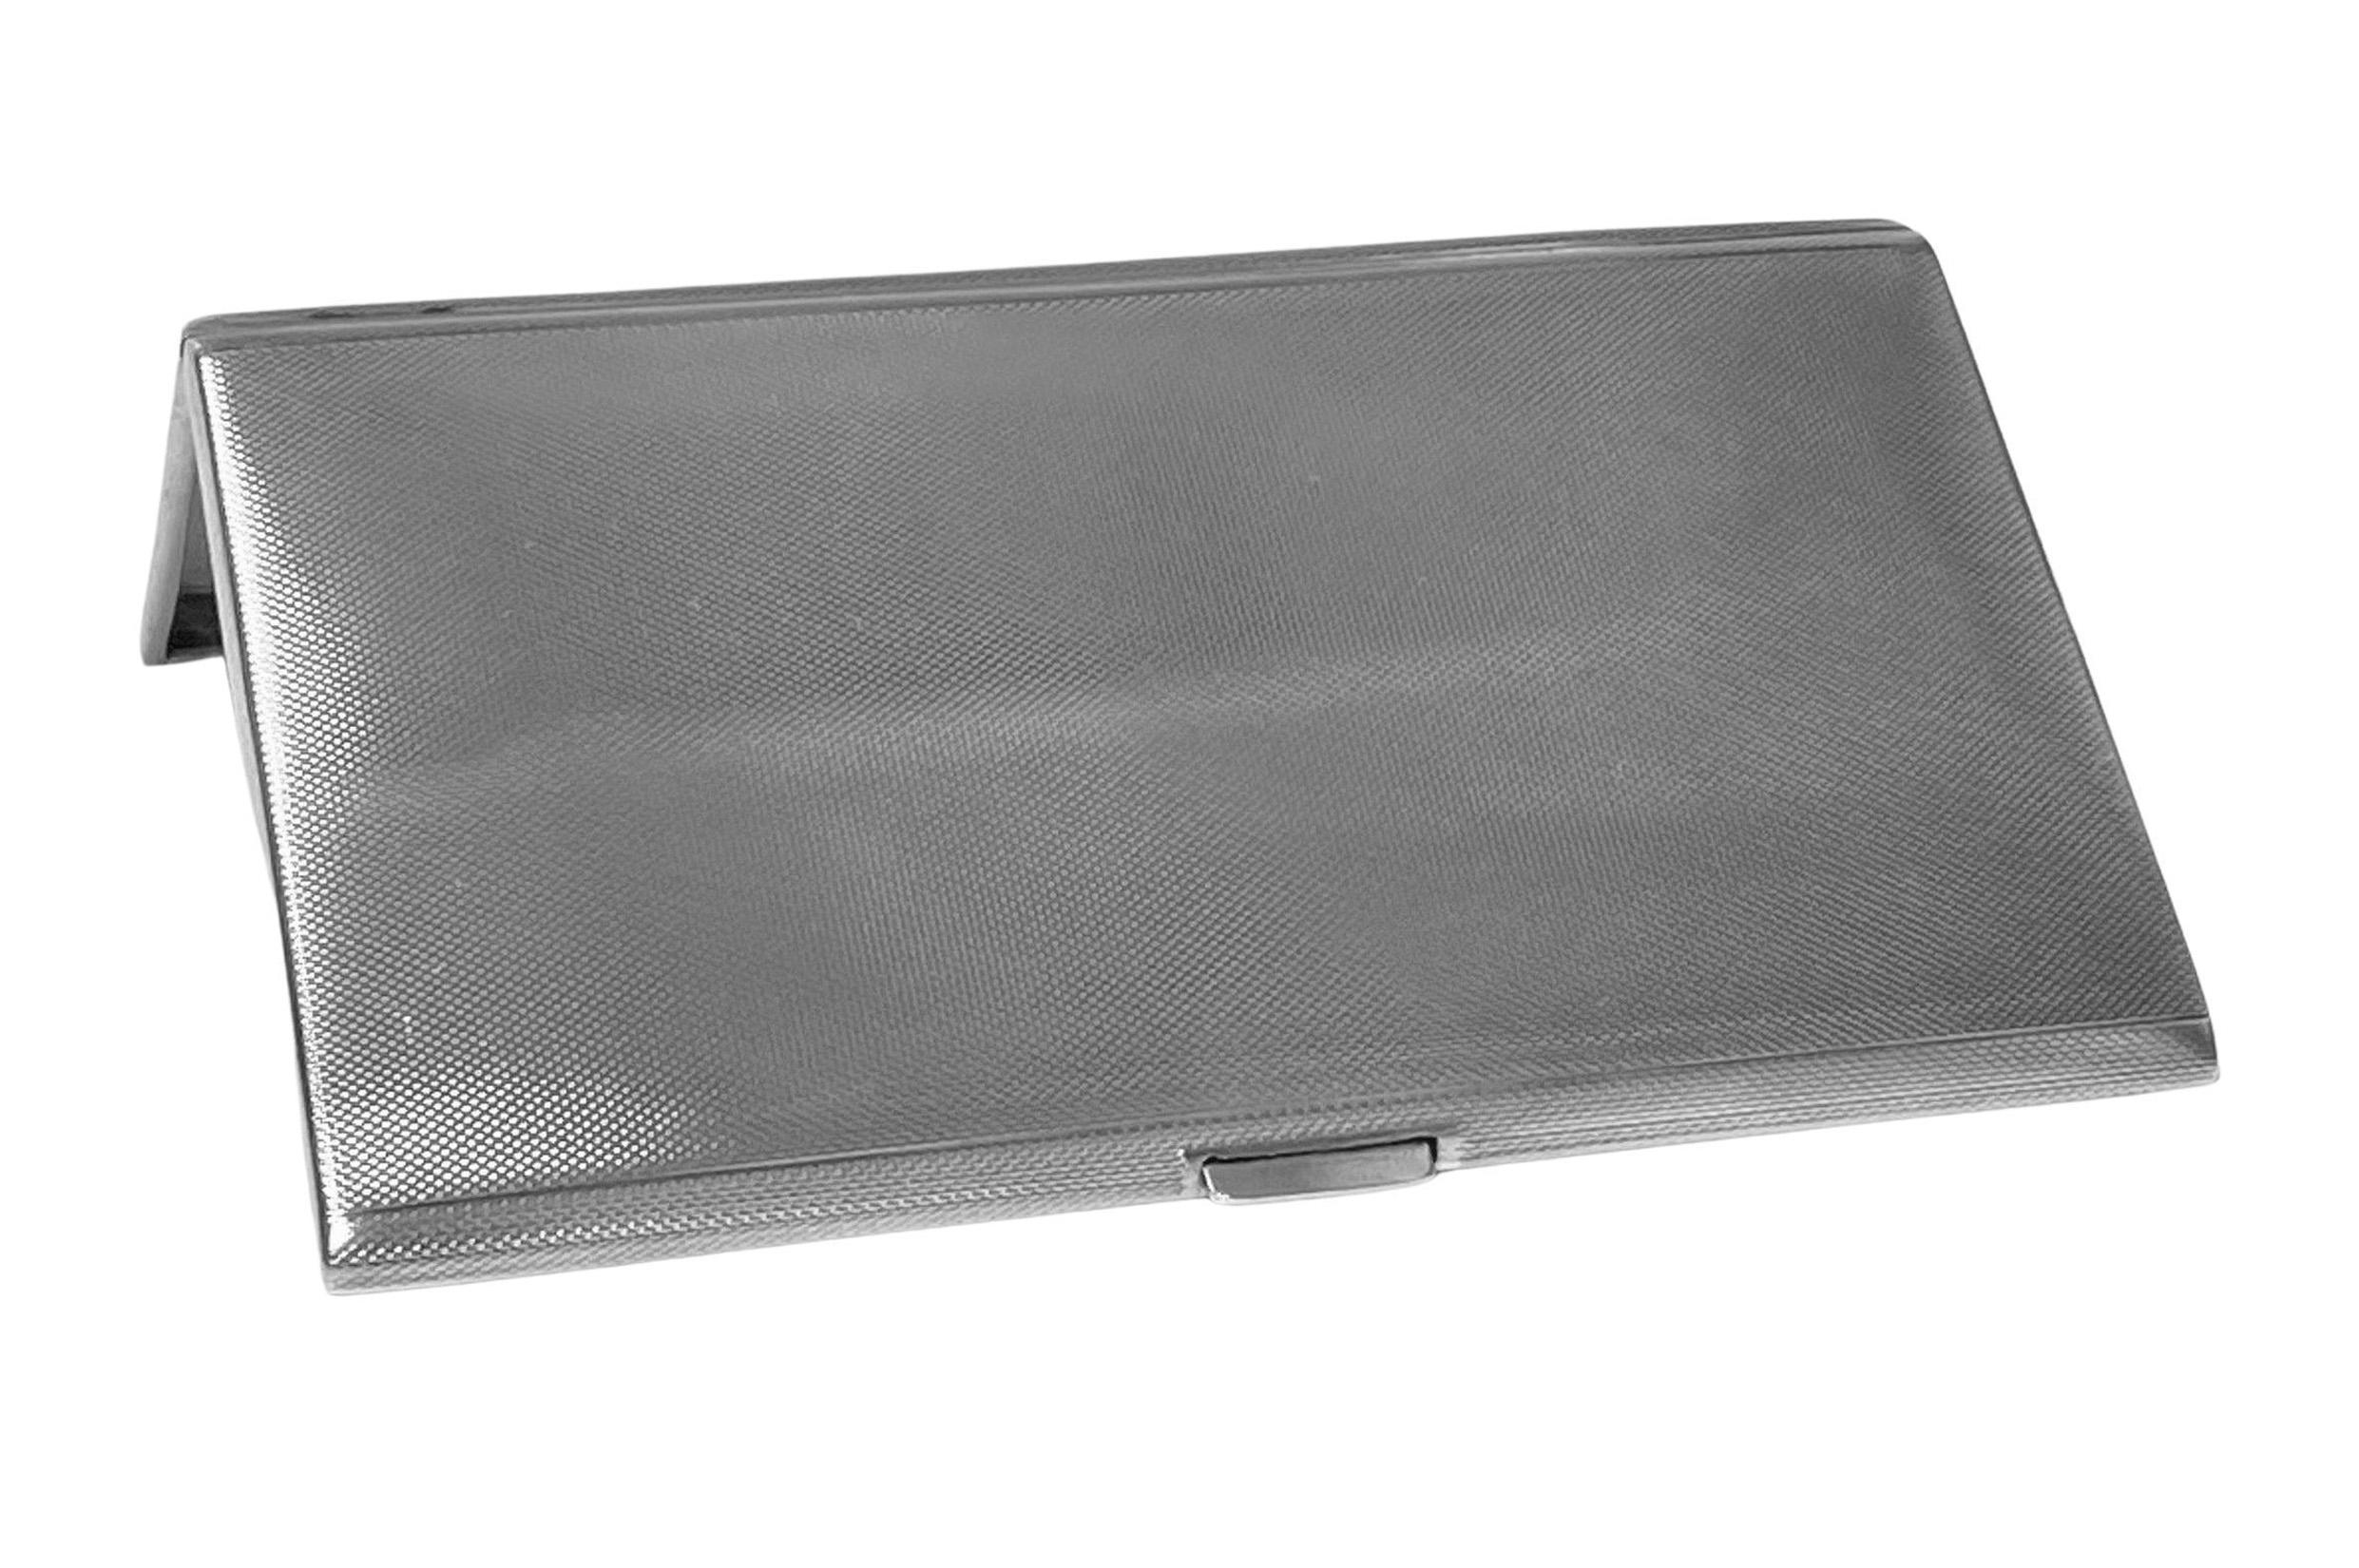 Large English sterling silver cigarette case Birmingham 1956, H. Pidduck and Sons. Unusual engine turned decoration design both exterior and interior. Fully hallmarked. Measures: 5.50 x 3.50x 0.38 inches. Item weight: 211 grams. Heavy gauge silver.